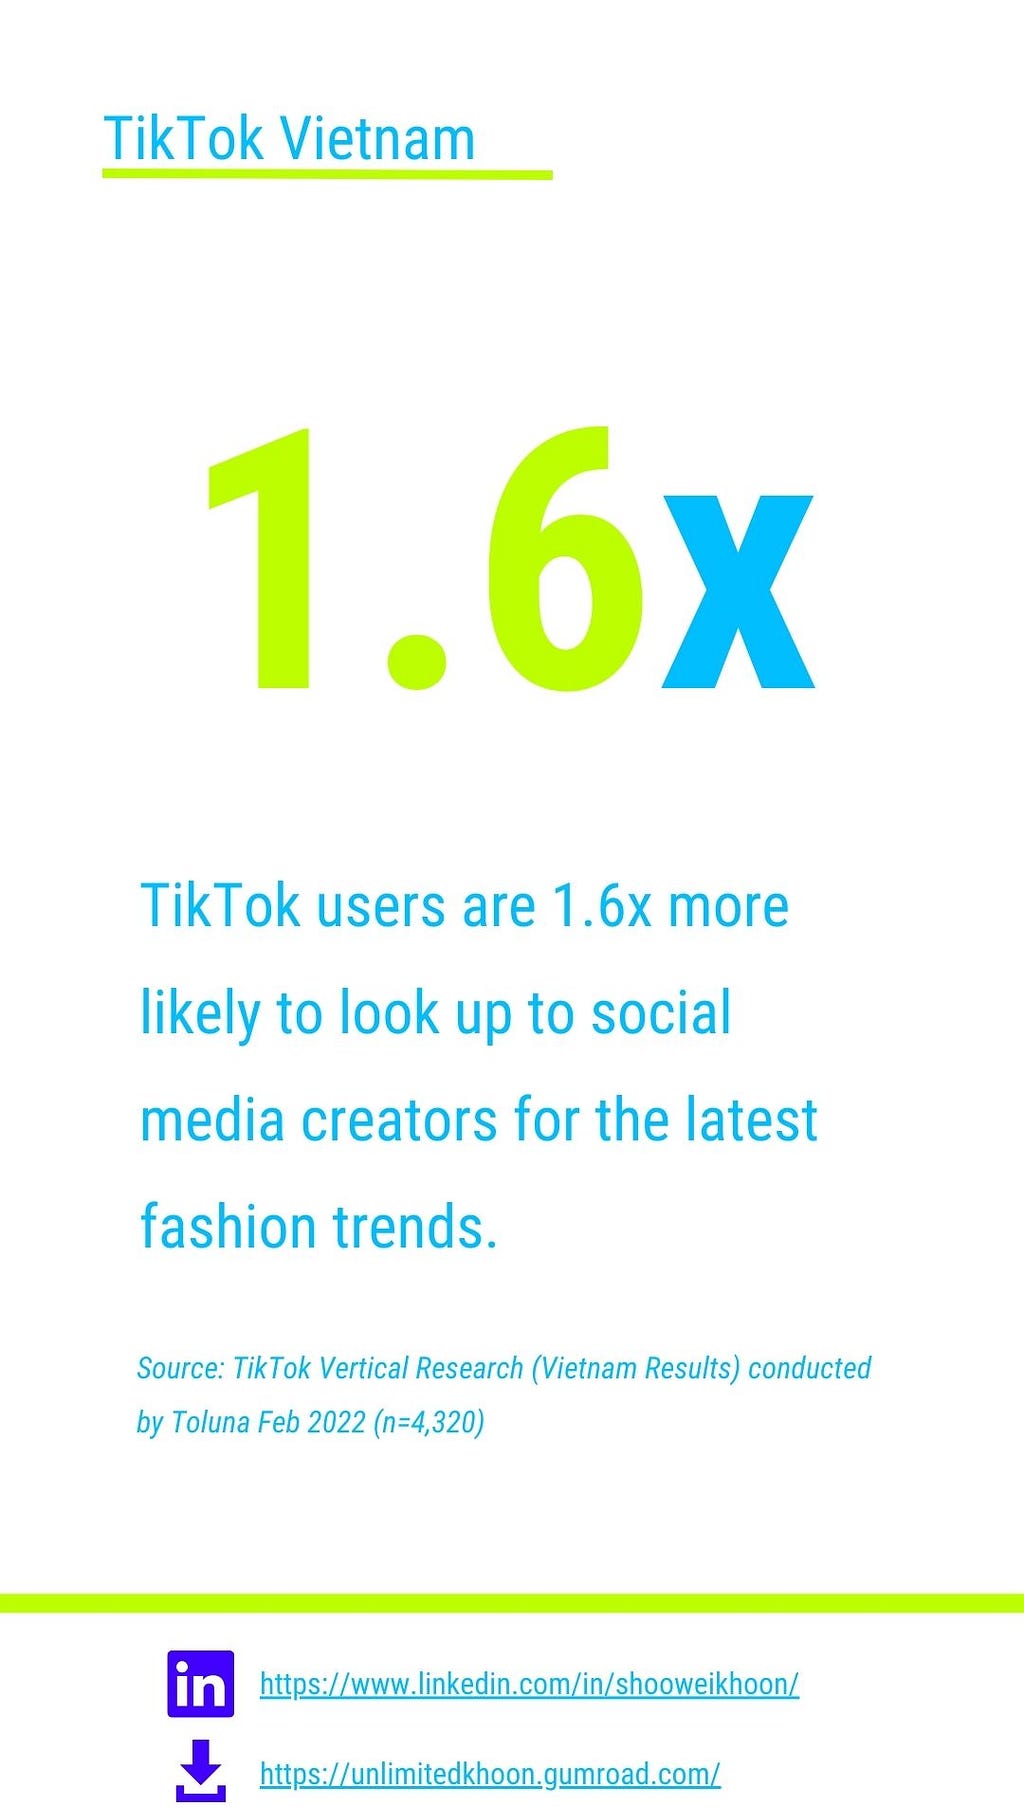 VN TikTok users are 1.6x more likely to look up to social media creators for the latest fashion trends